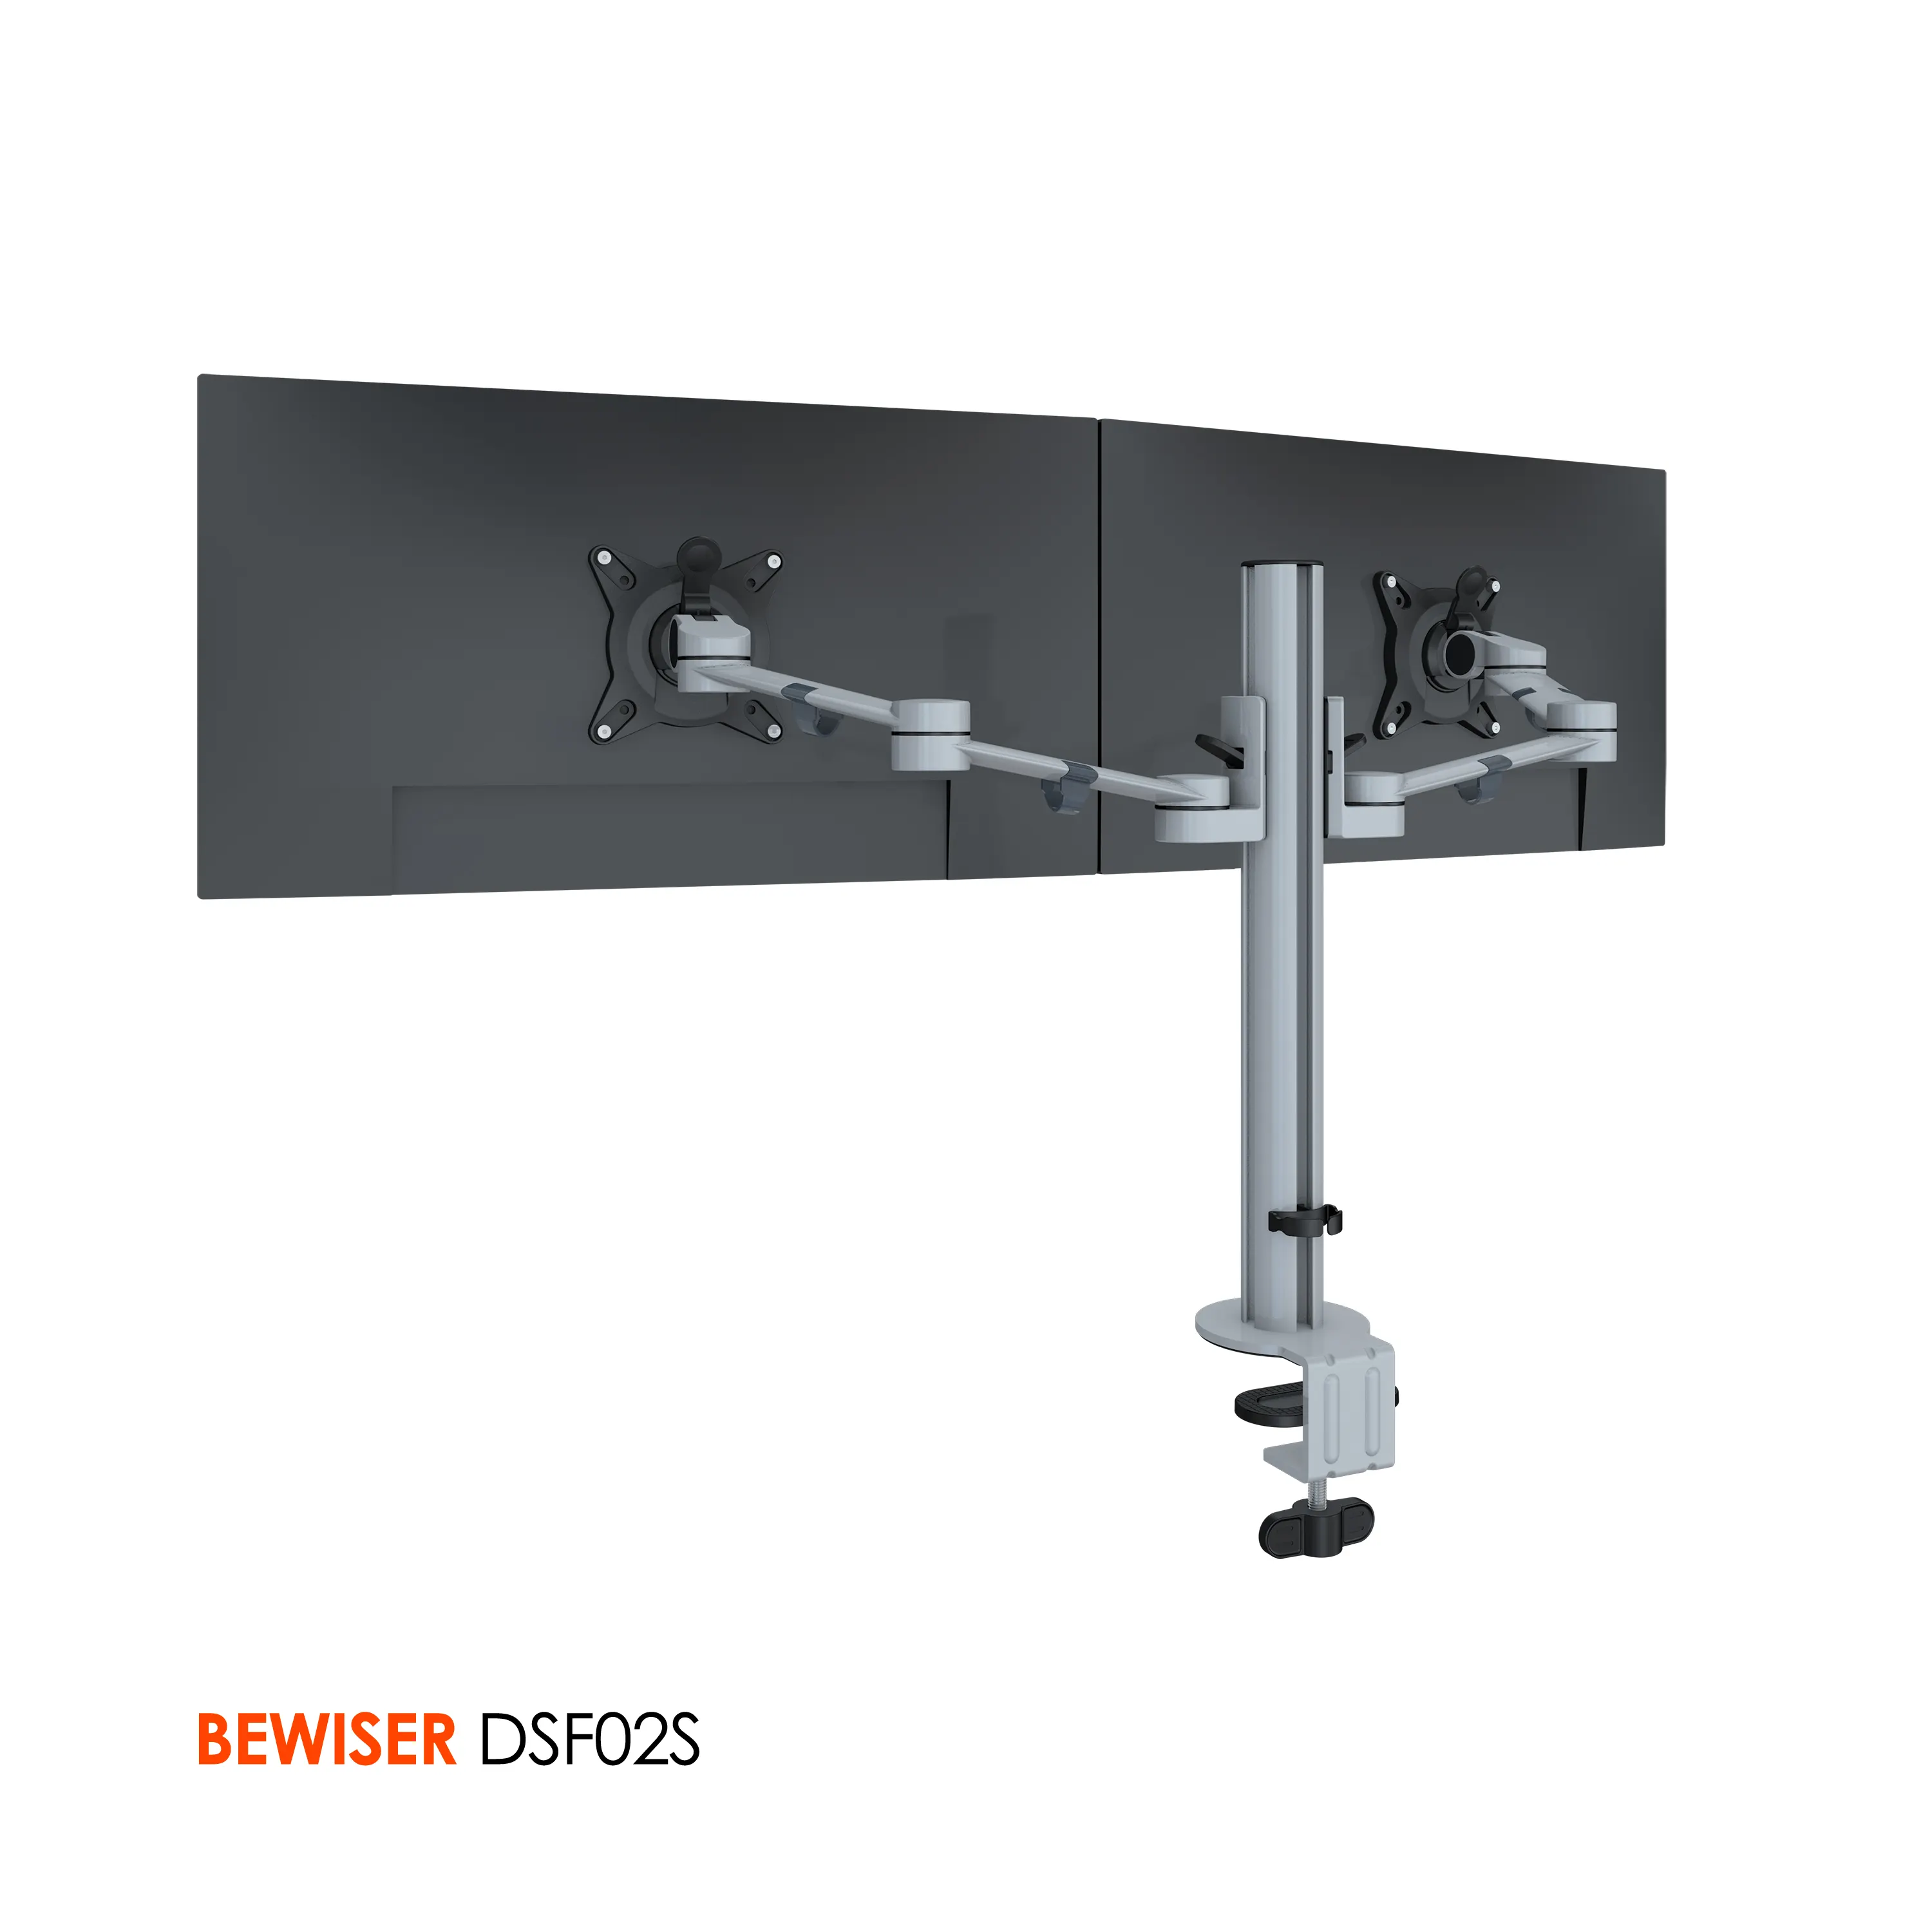 Computer support double monitor stand dual lcd bracket (BEWISER DSF02S)